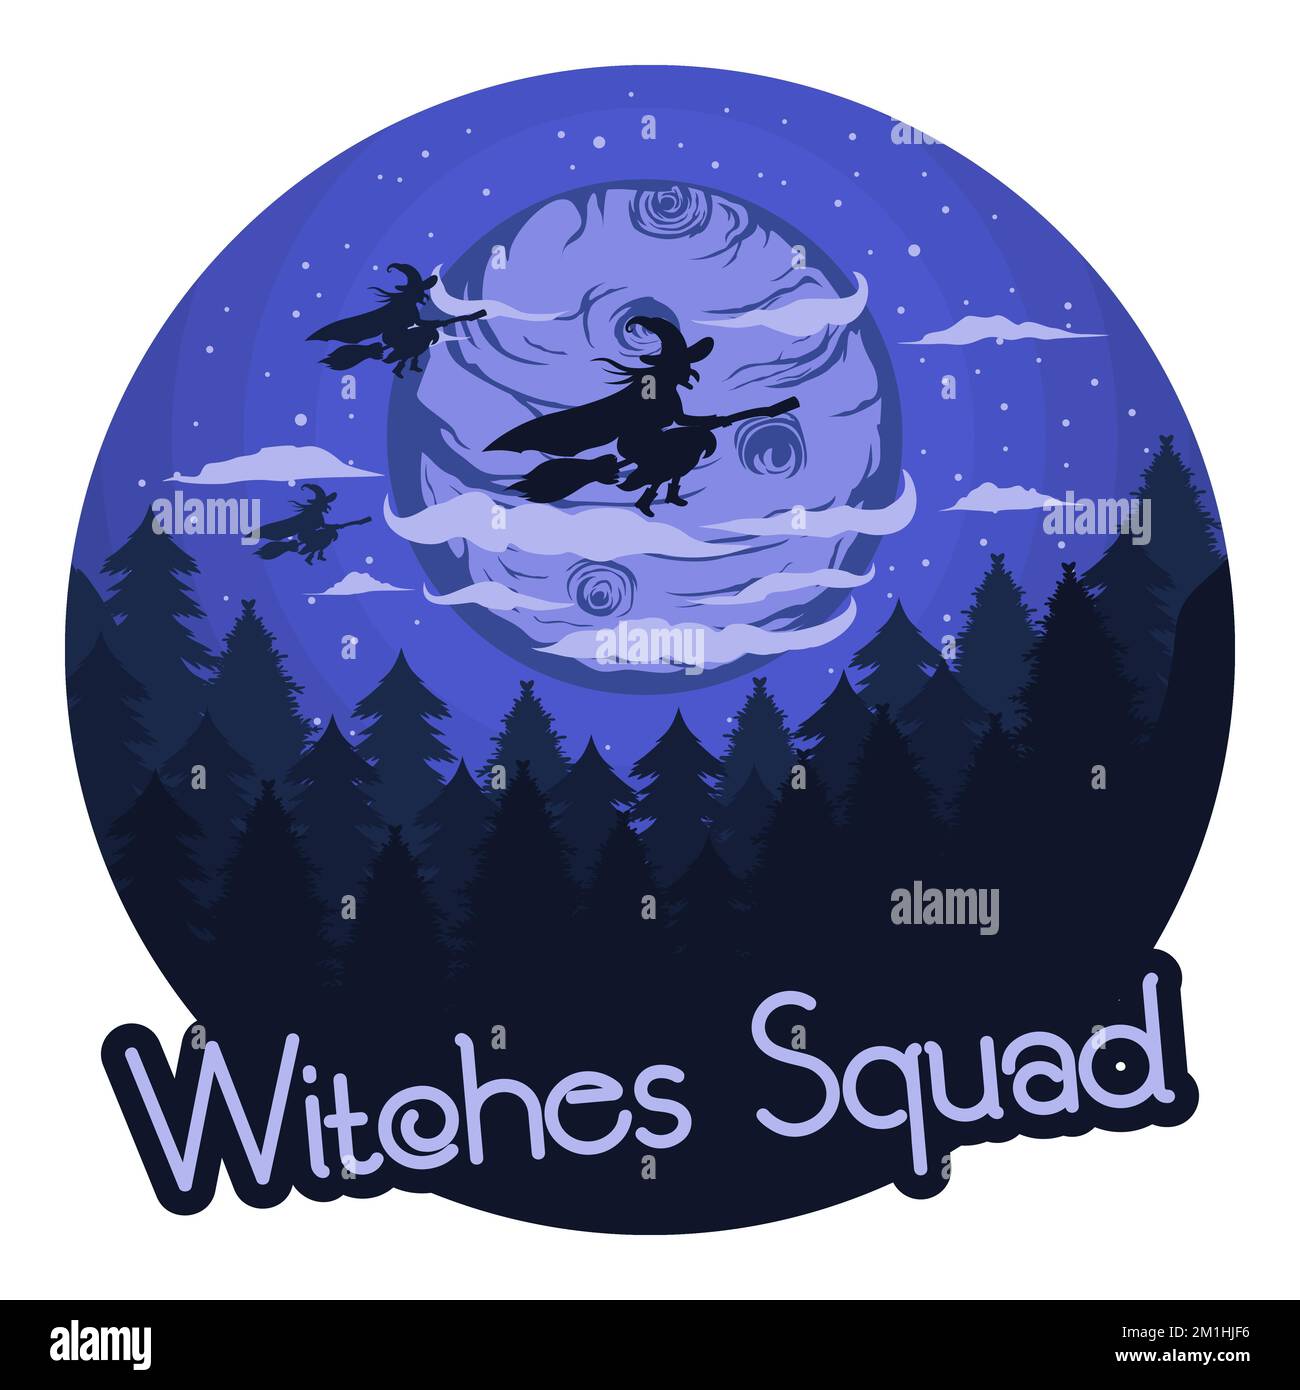 Witches Squad, Skull and Zombie Typography Quote Design. Stock Vector